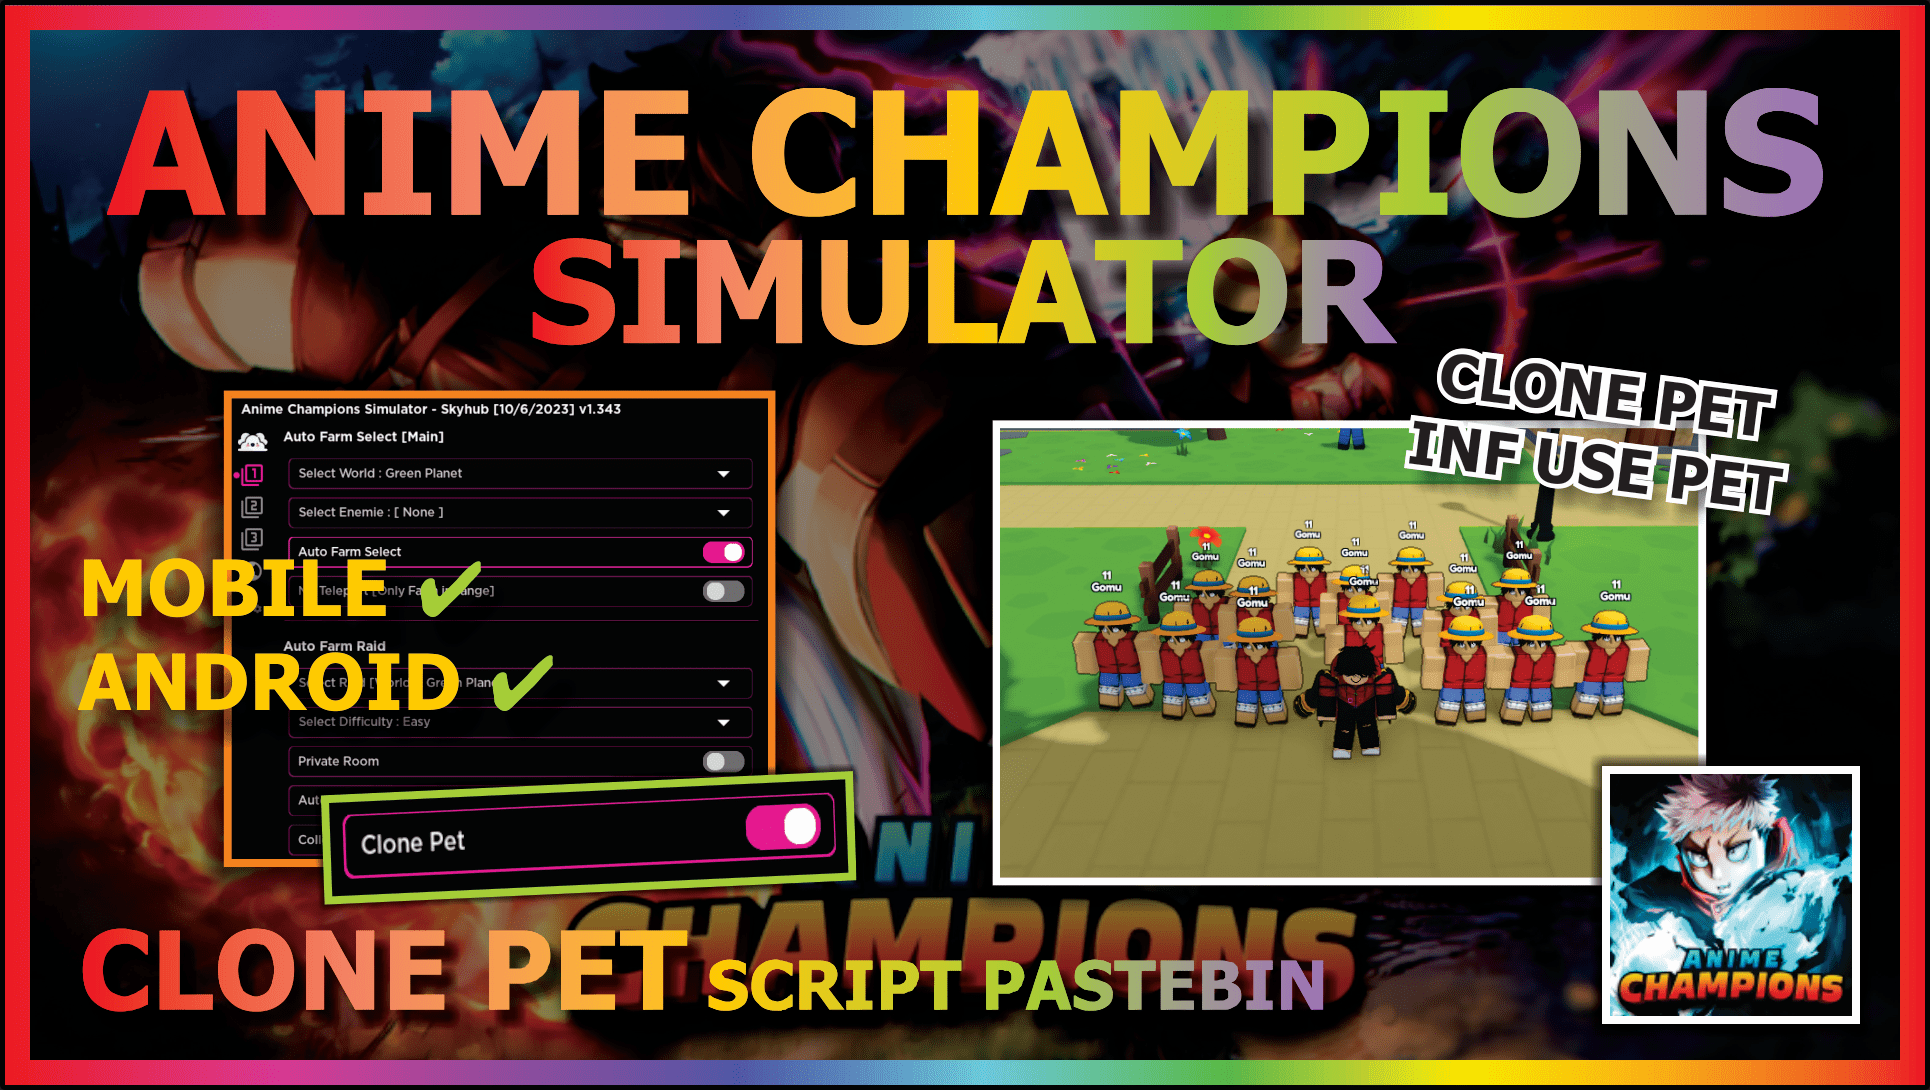 You are currently viewing ANIME CHAMPIONS SIMULATOR (CLONE PET)